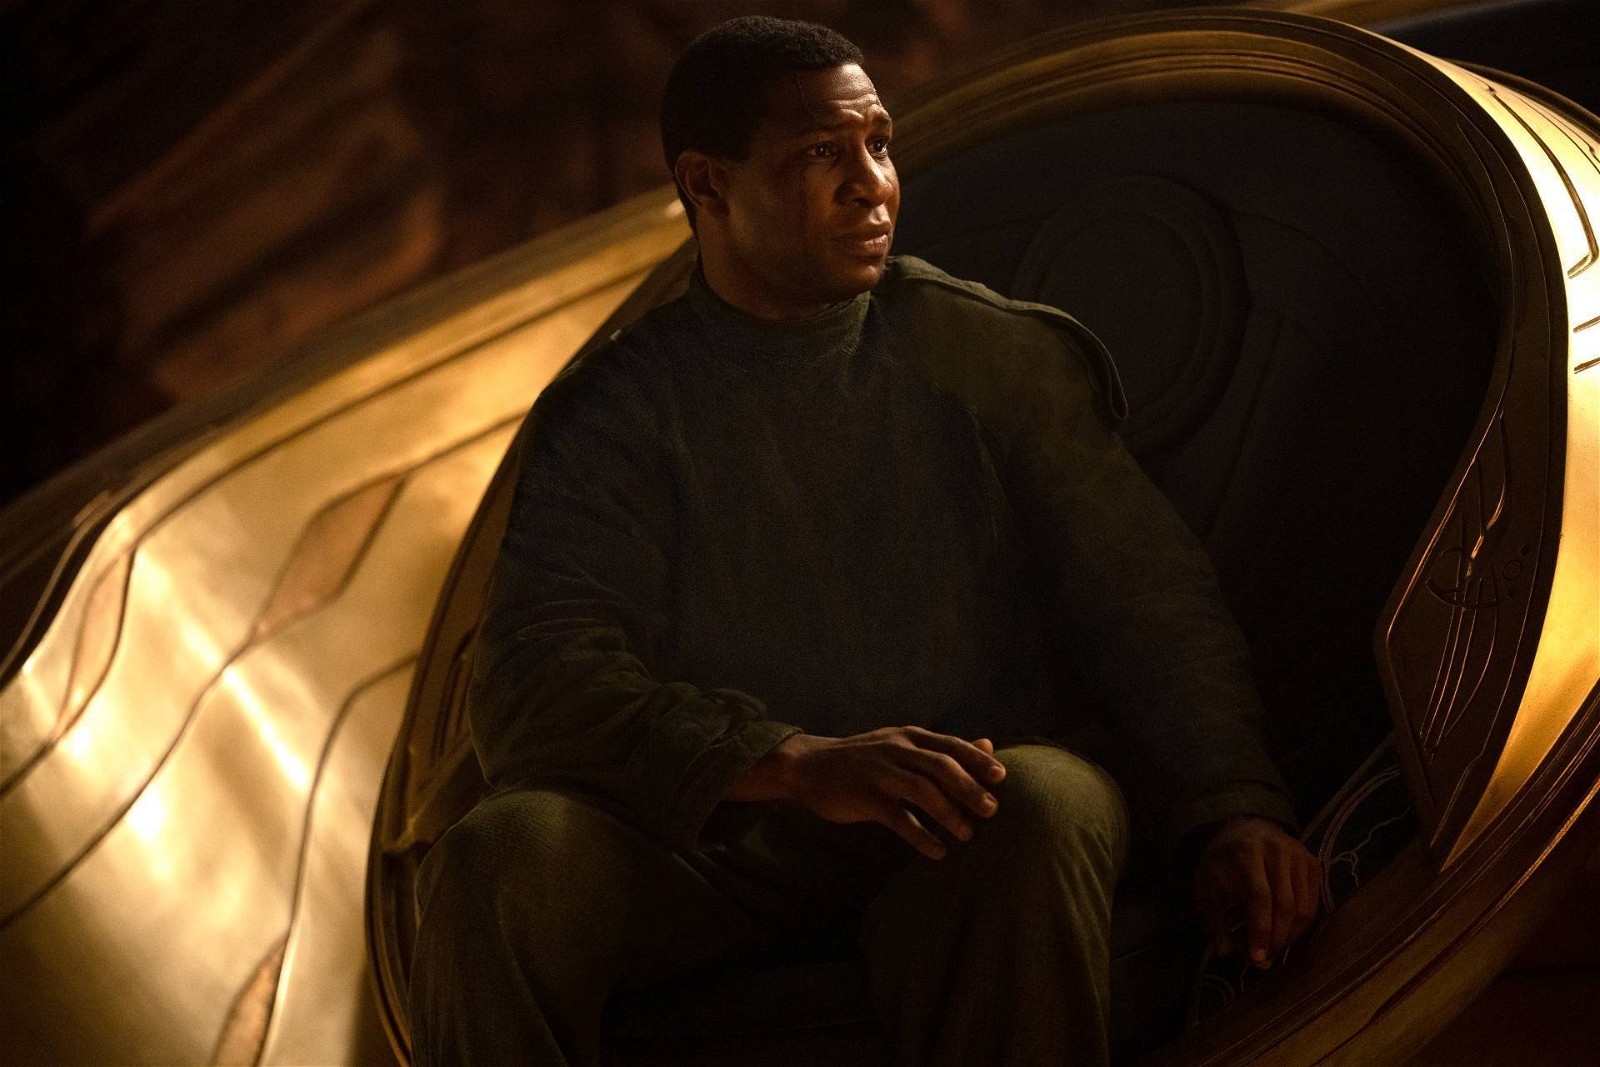 Jonathan Majors as Kang The Conquerer in Ant-Man and The Wasp: Quantumania 